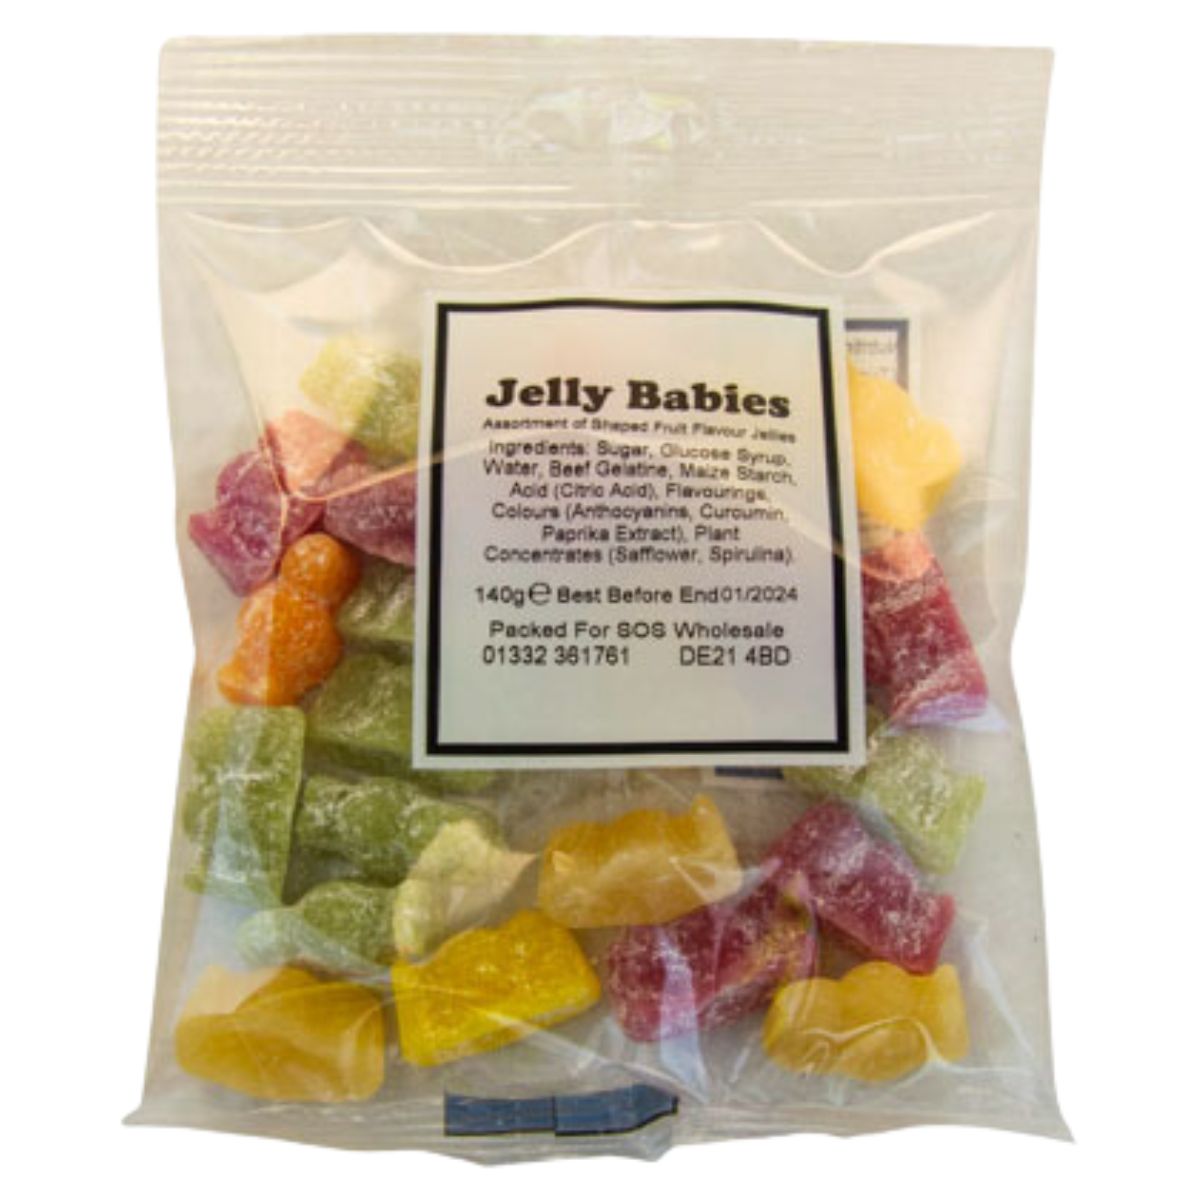 Bumper Bag - Jelly Babies - 140g in a bag.